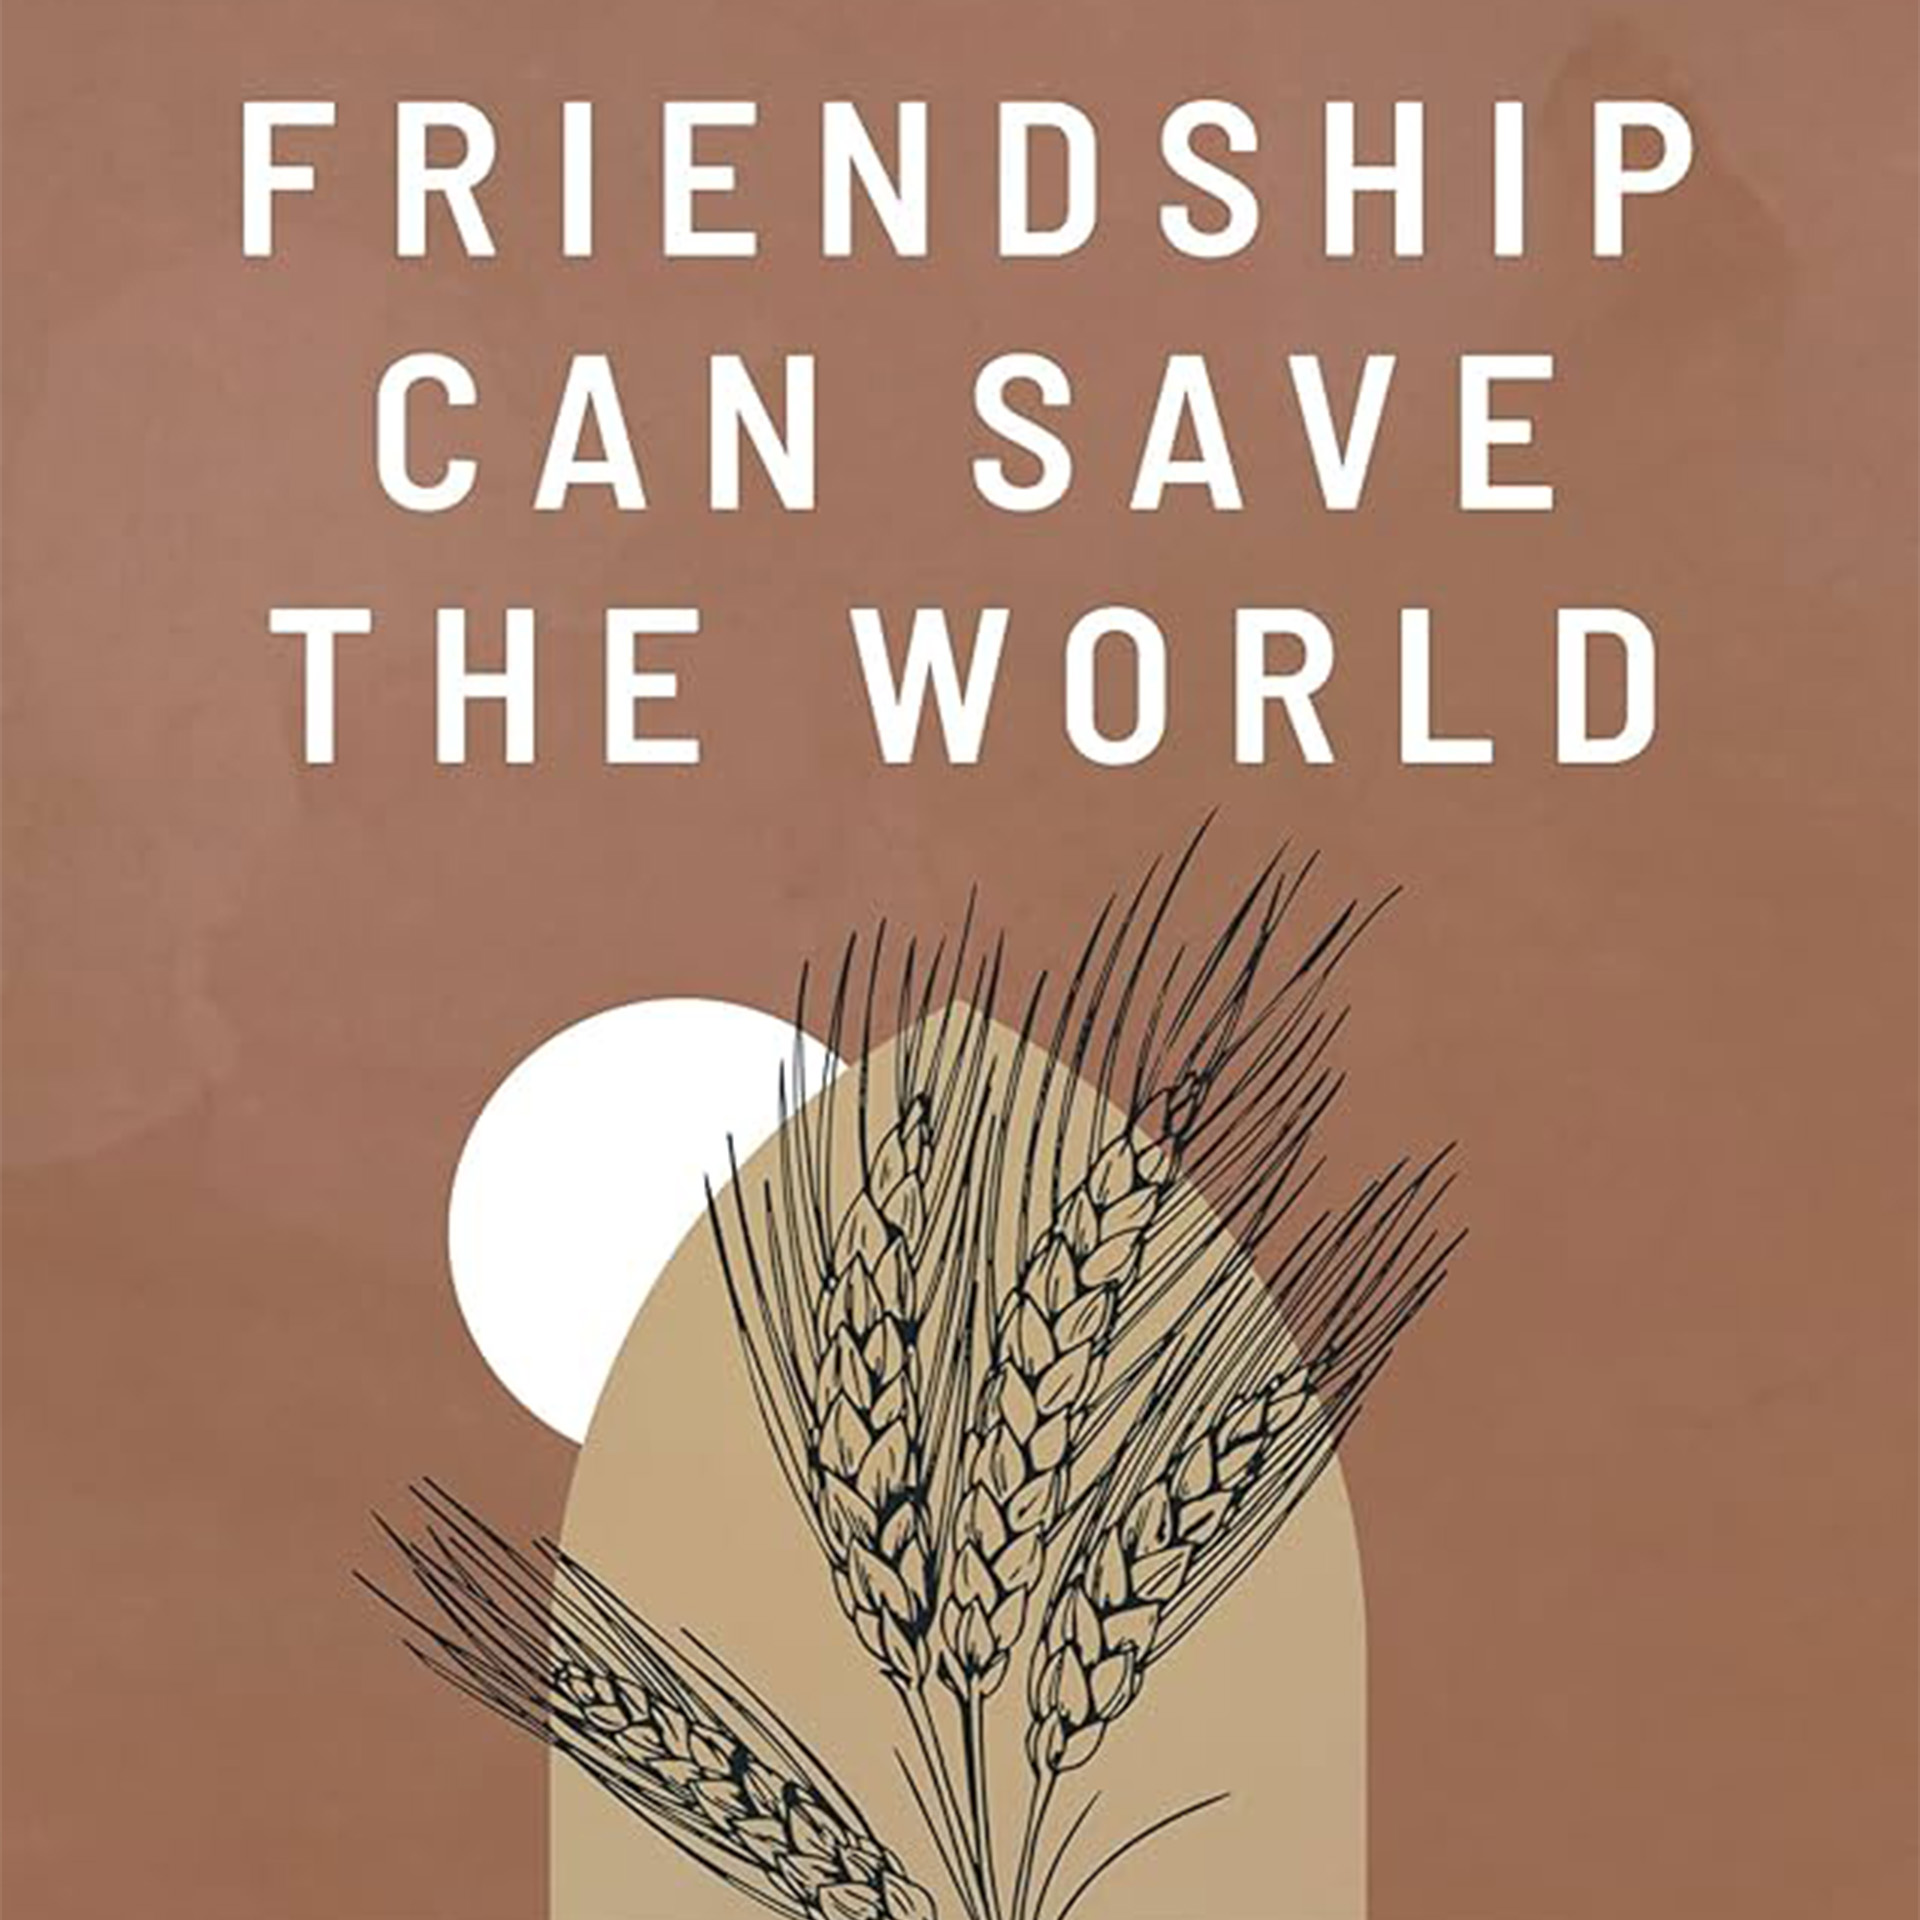 Friendship Can Save the World by Carrie and Morgan Stephens